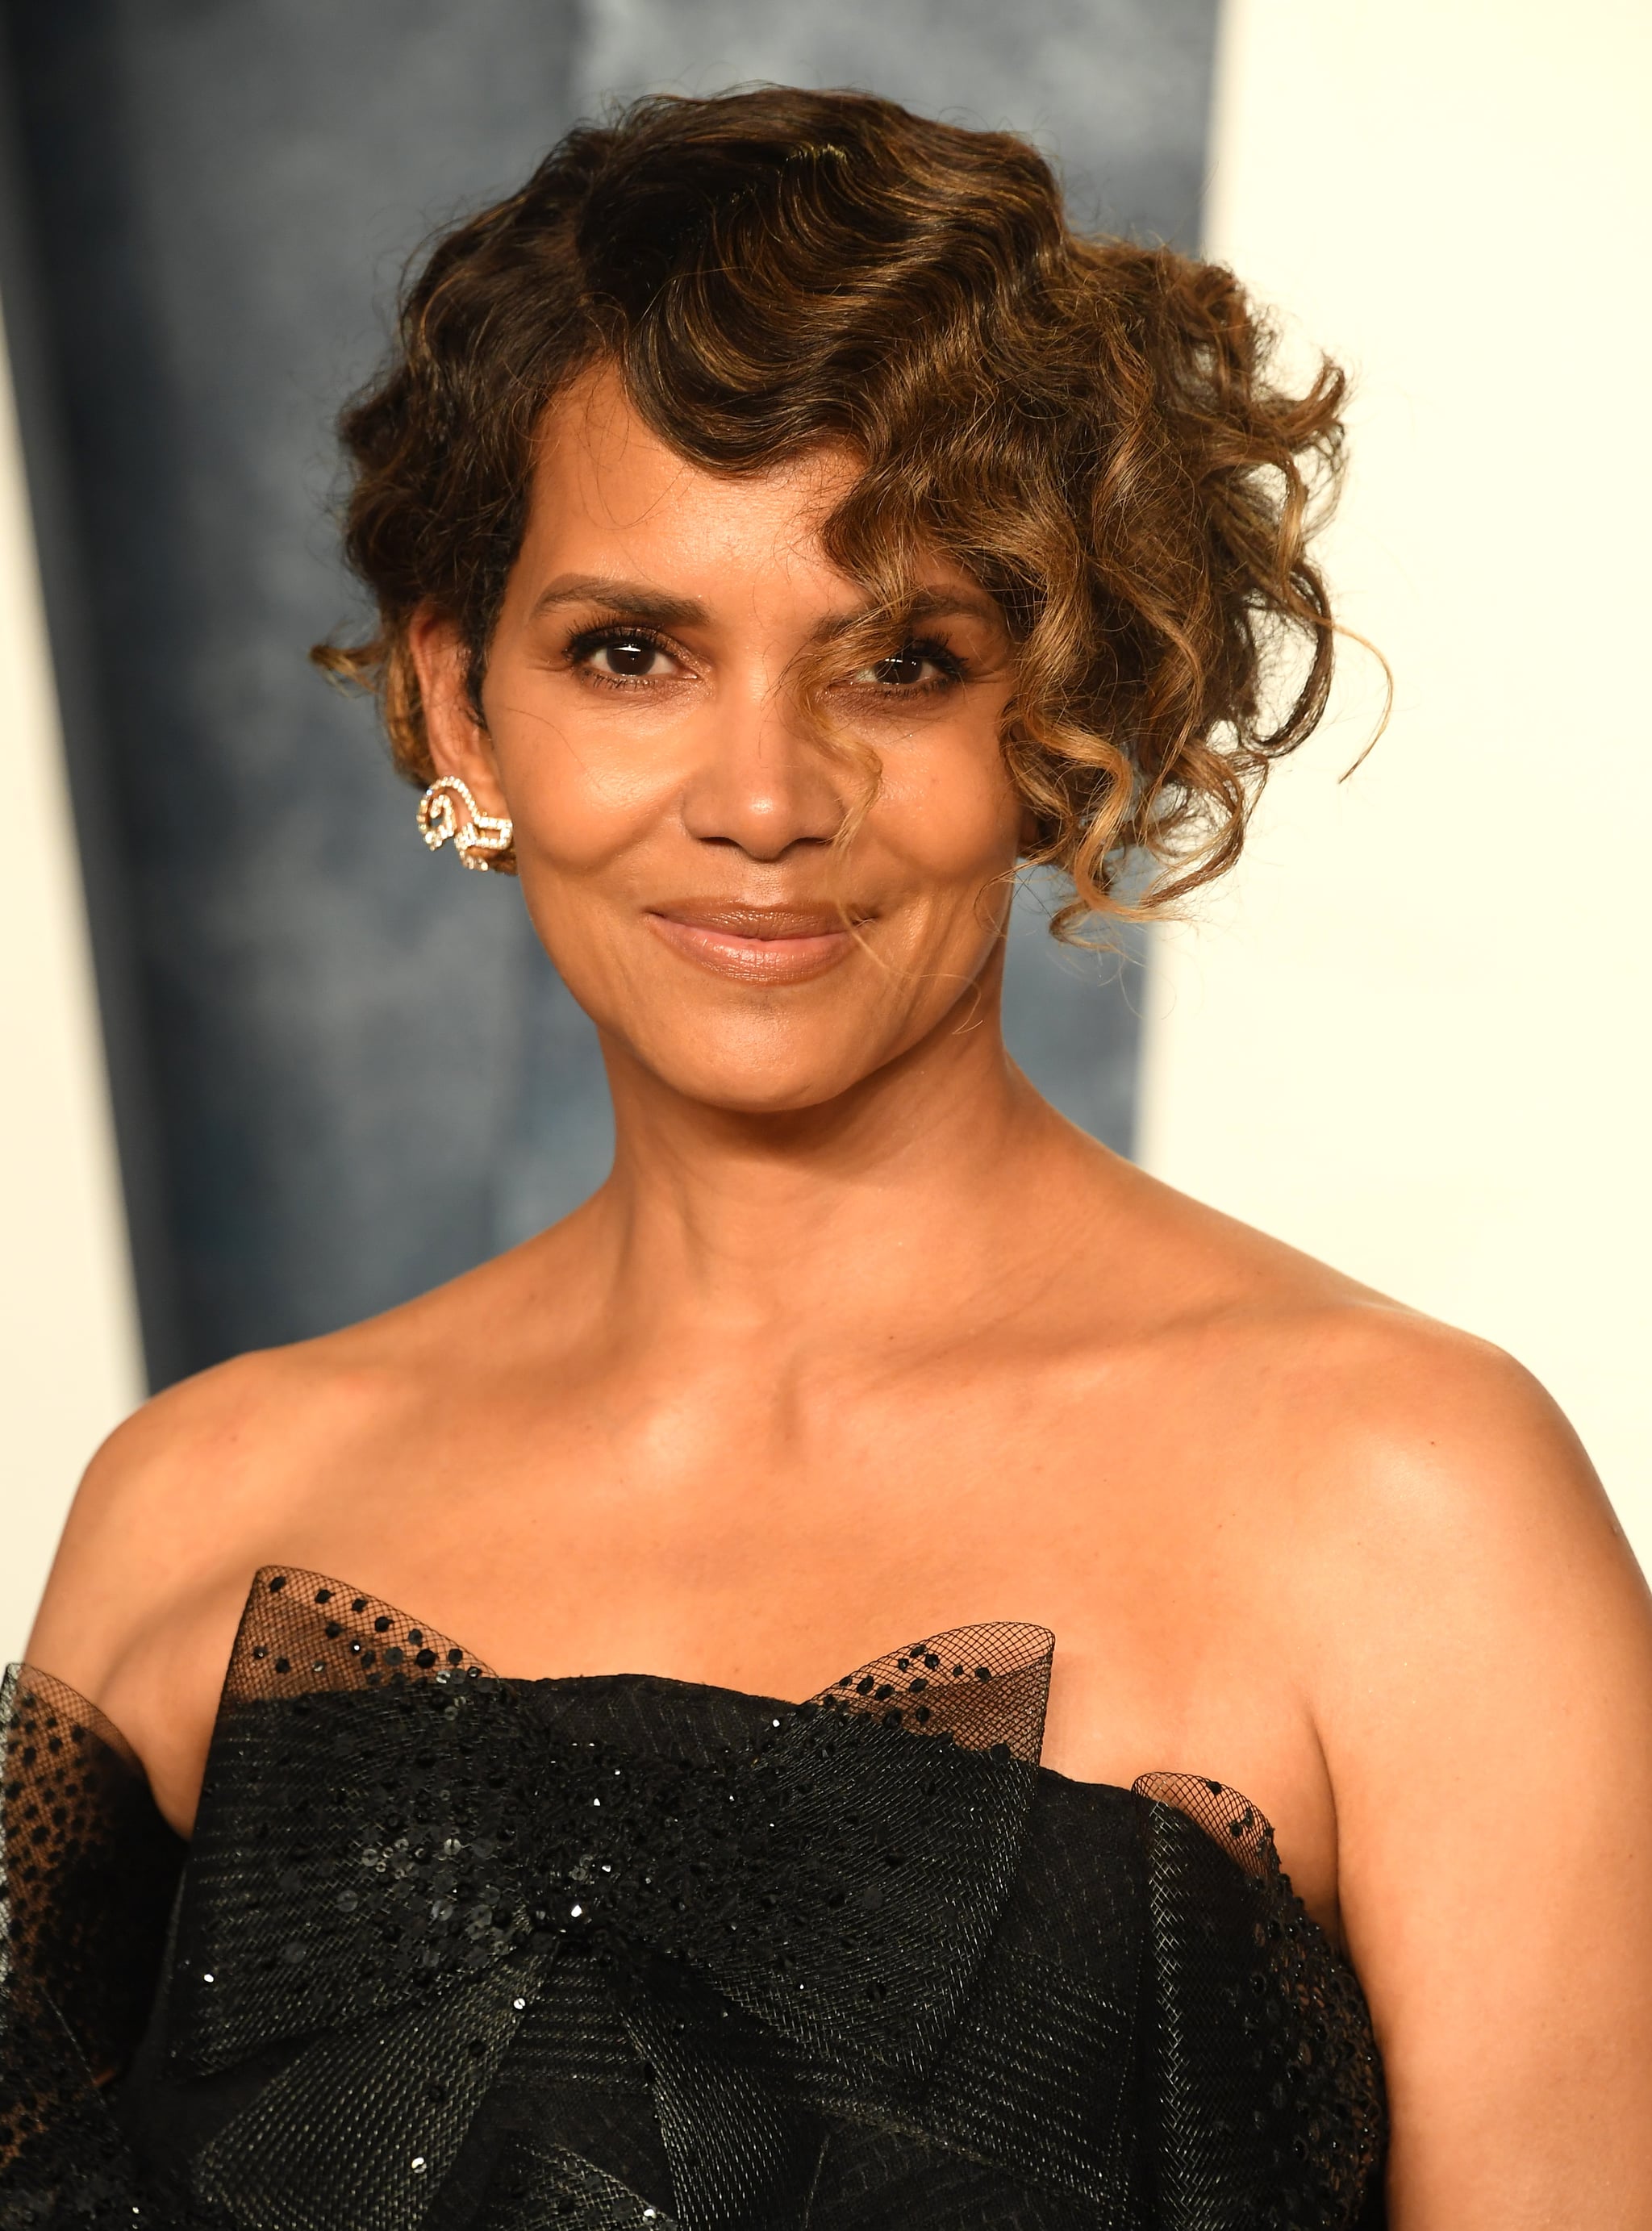 BEVERLY HILLS, CALIFORNIA - MARCH 12: 2023 Halle Berry arrives at the Vanity Fair Oscar Party Hosted By Radhika Jones at Wallis Annenberg Centre for the Performing Arts on March 12, 2023 in Beverly Hills, California. (Photo by Steve Granitz/FilmMagic)